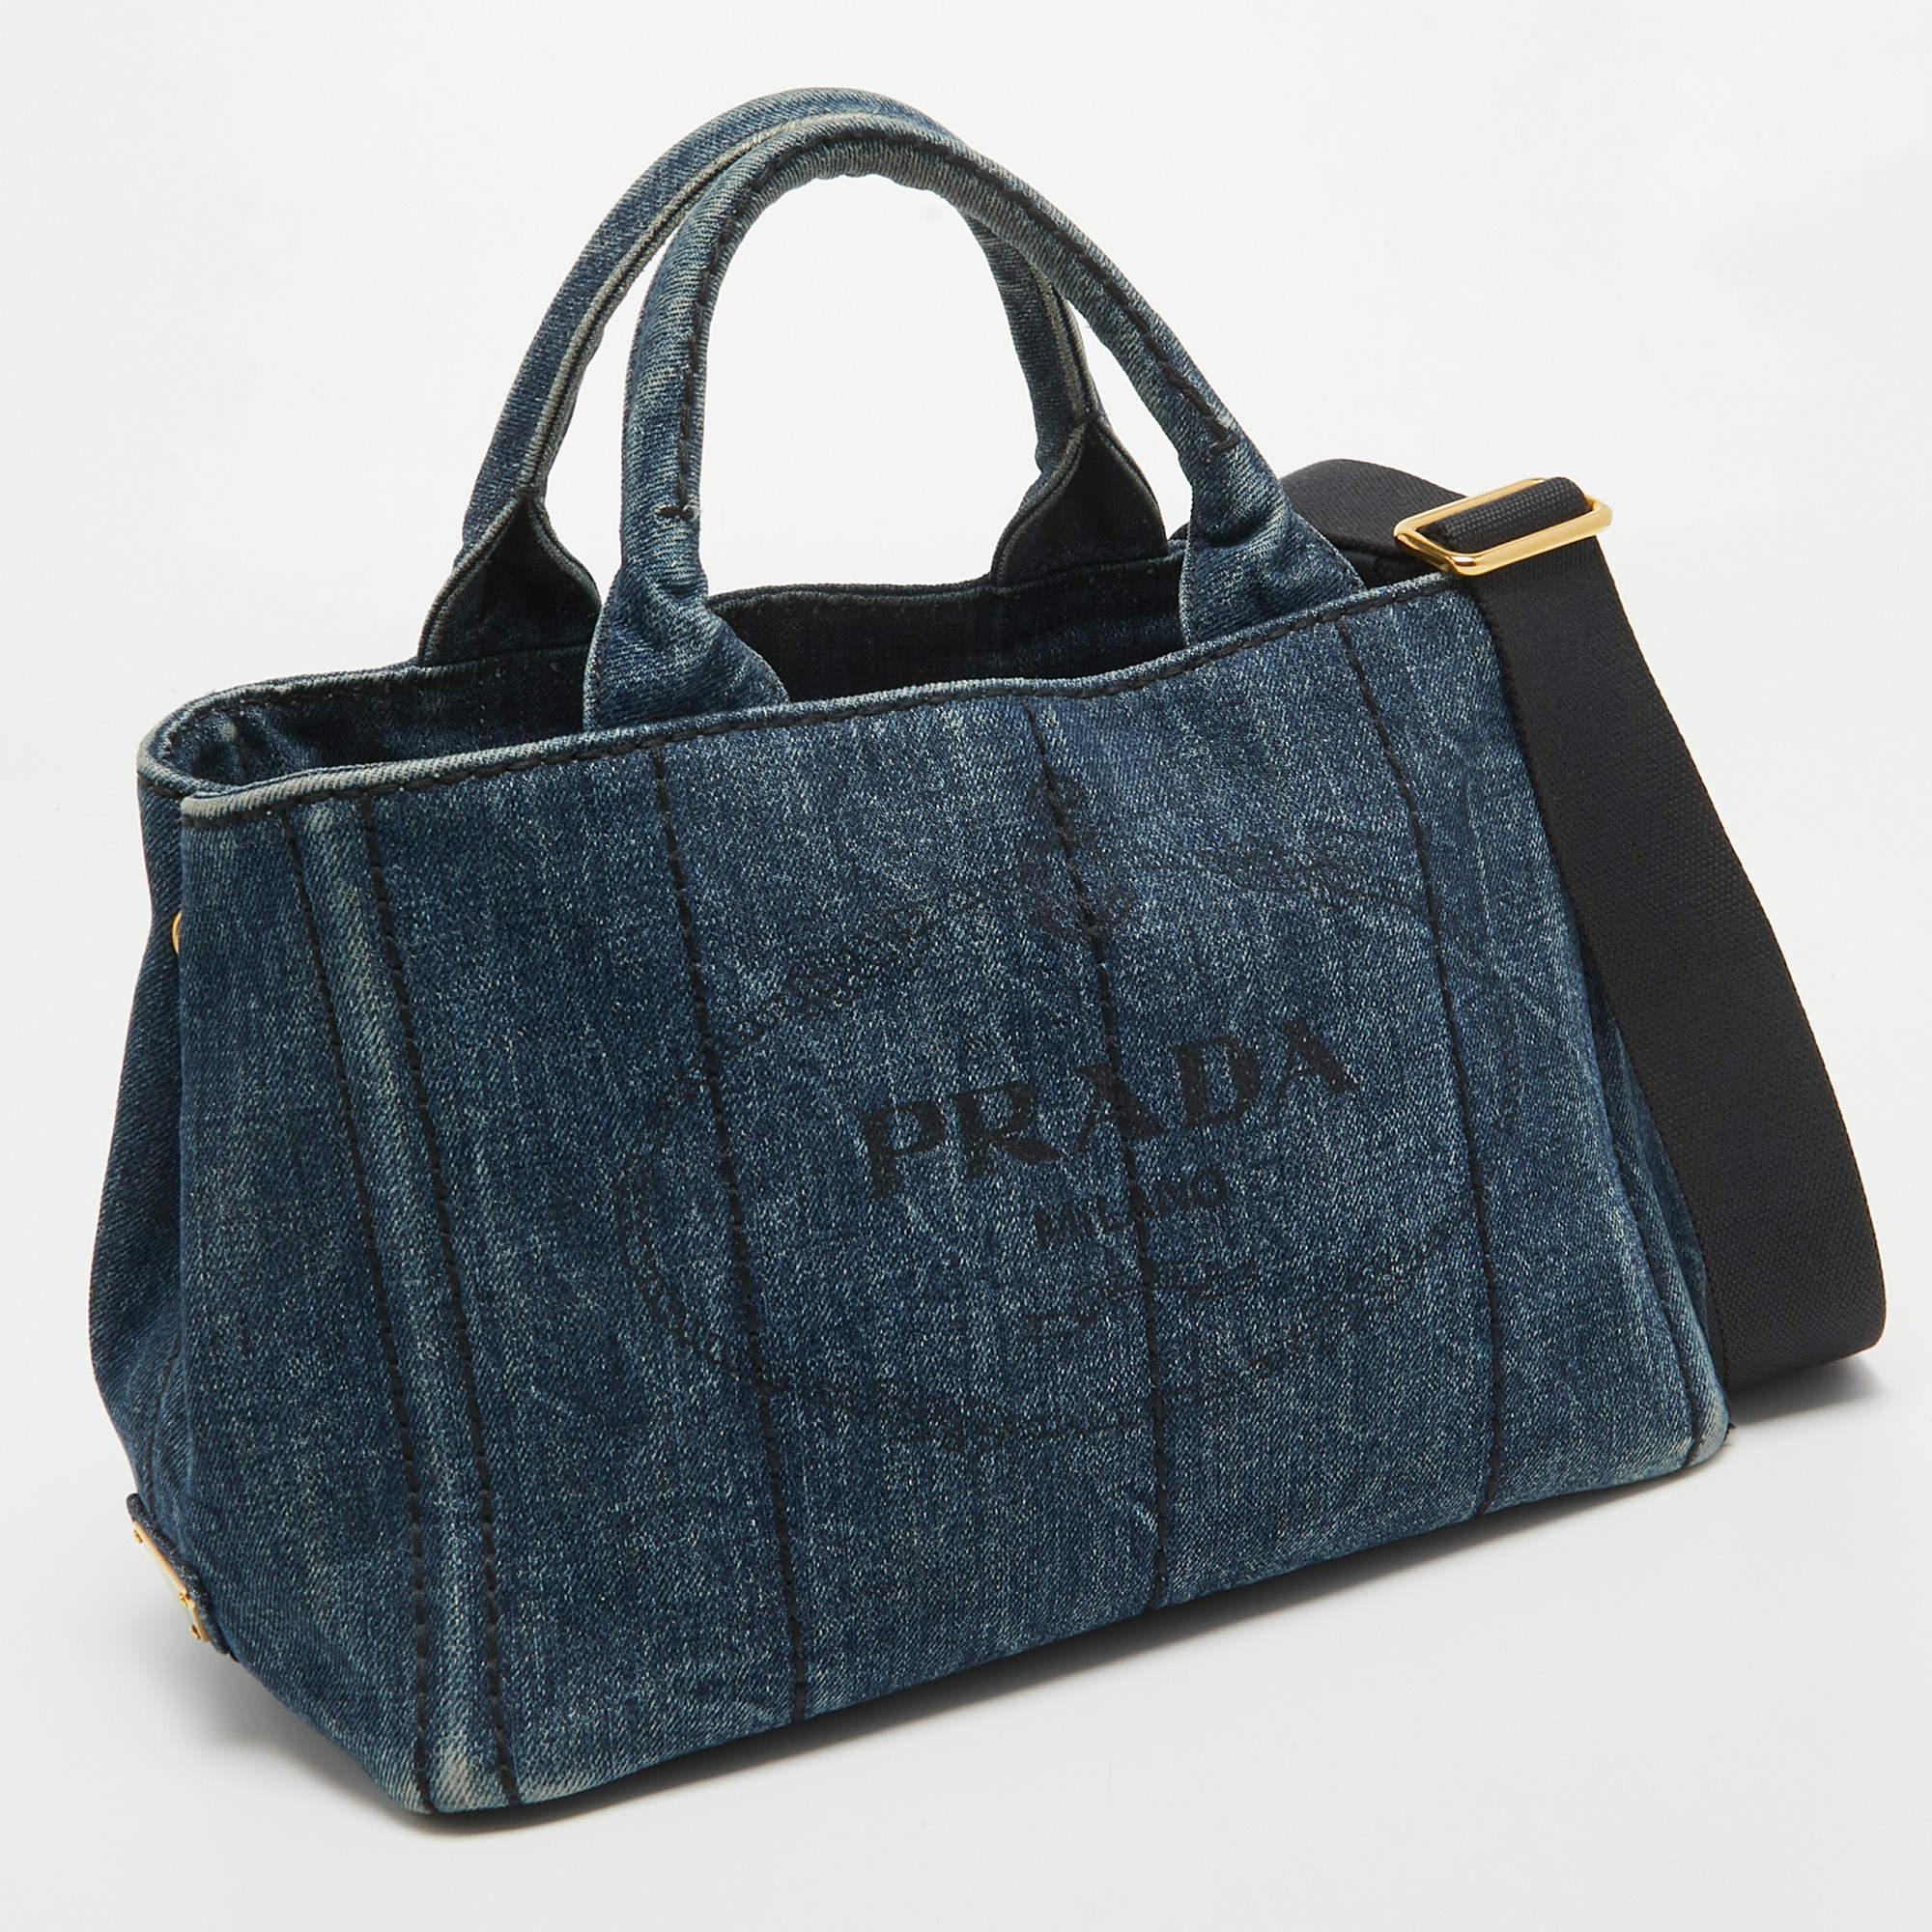 This alluring tote bag for women has been designed to assist you on any day. Convenient to carry and fashionably designed, the tote is cut with skill and sewn into a great shape. It is well-equipped to be a reliable accessory.

Includes:  Detachable